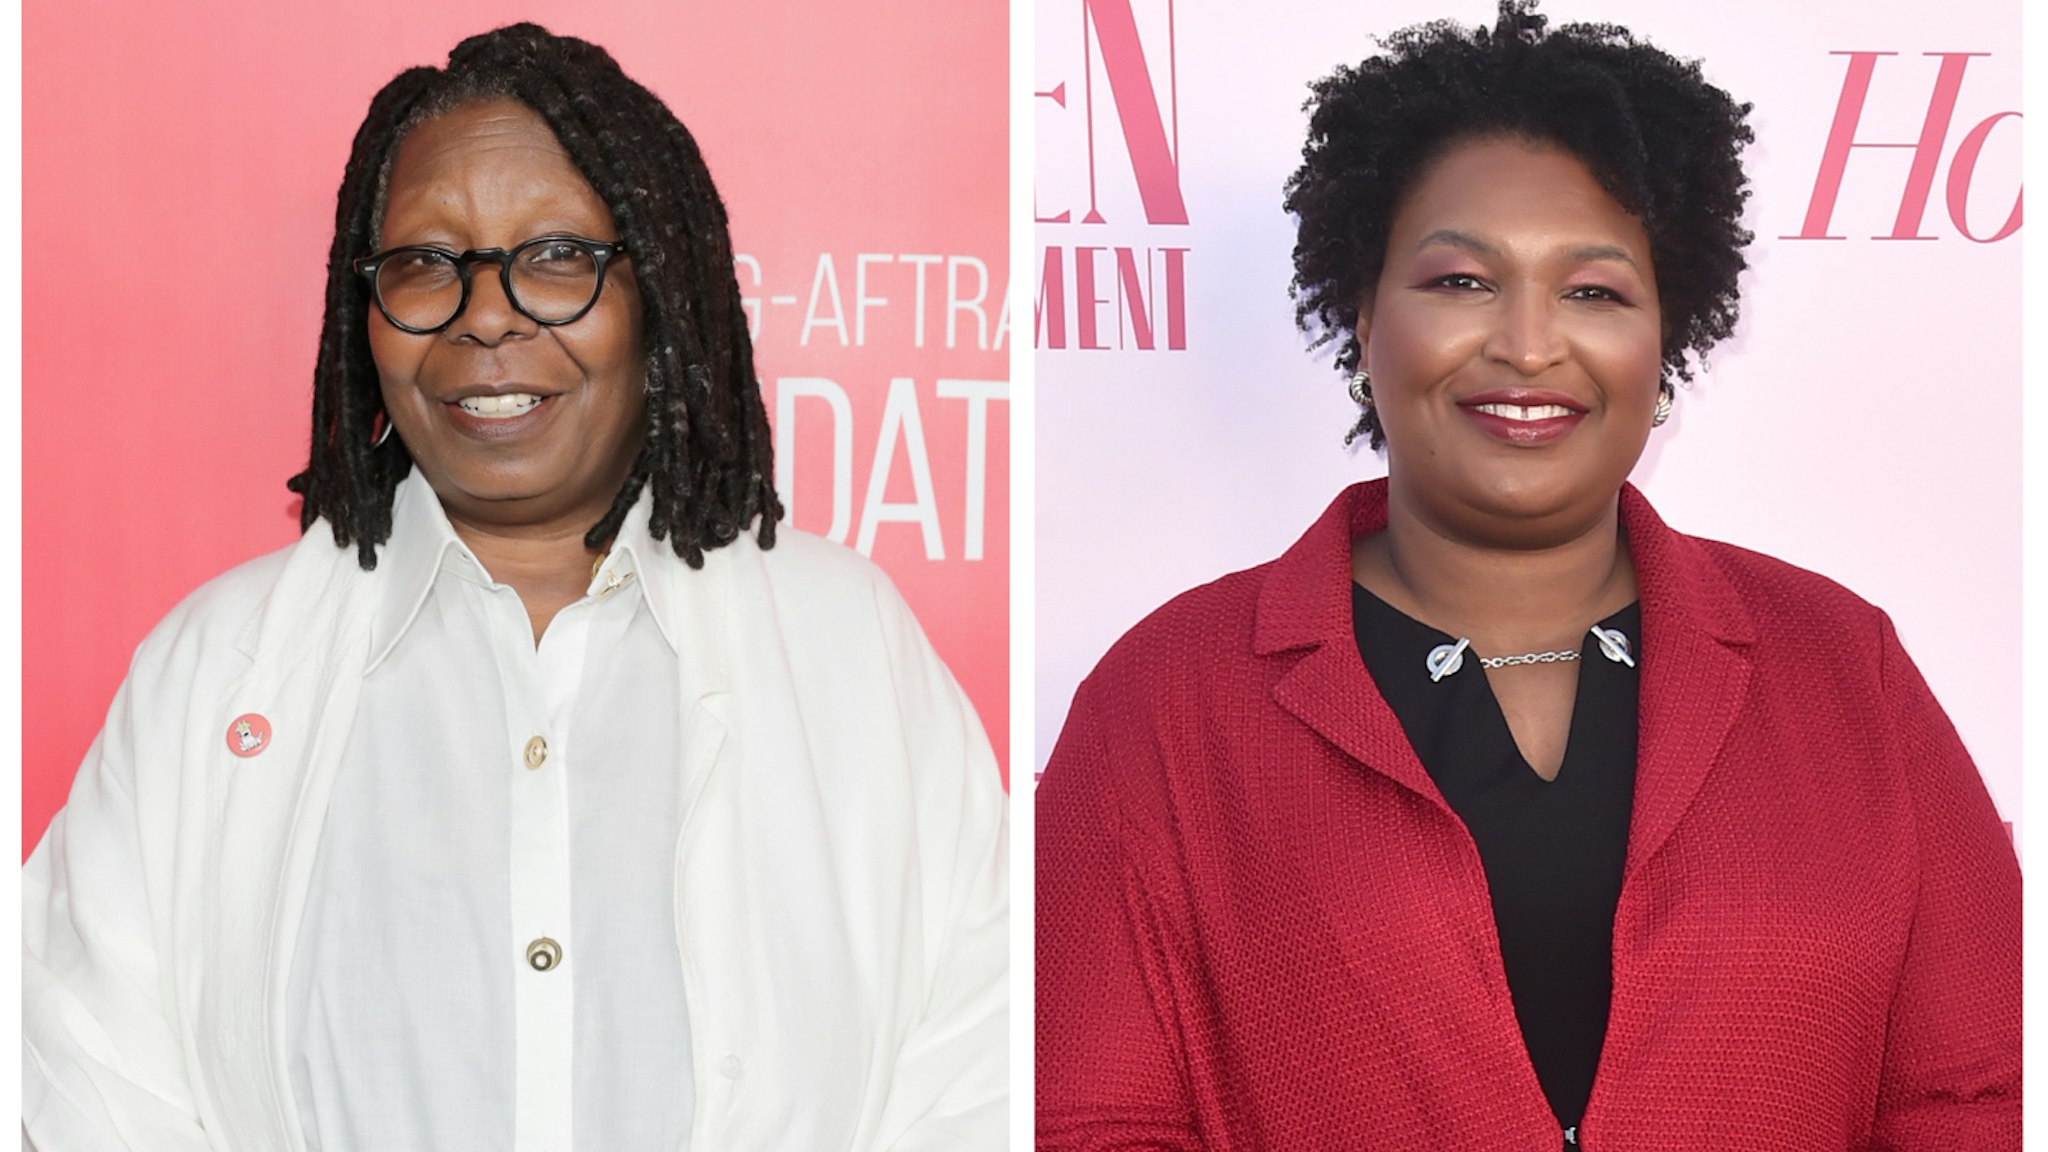 Actress Whoopi Goldberg attends the grand opening Of SAG-AFTRA Foundation's Robin Williams Center on October 5, 2016 in New York City. Politician Stacey Abrams attends The Hollywood Reporter's Power 100 Women in Entertainment at Milk Studios on December 11, 2019 in Hollywood, California.